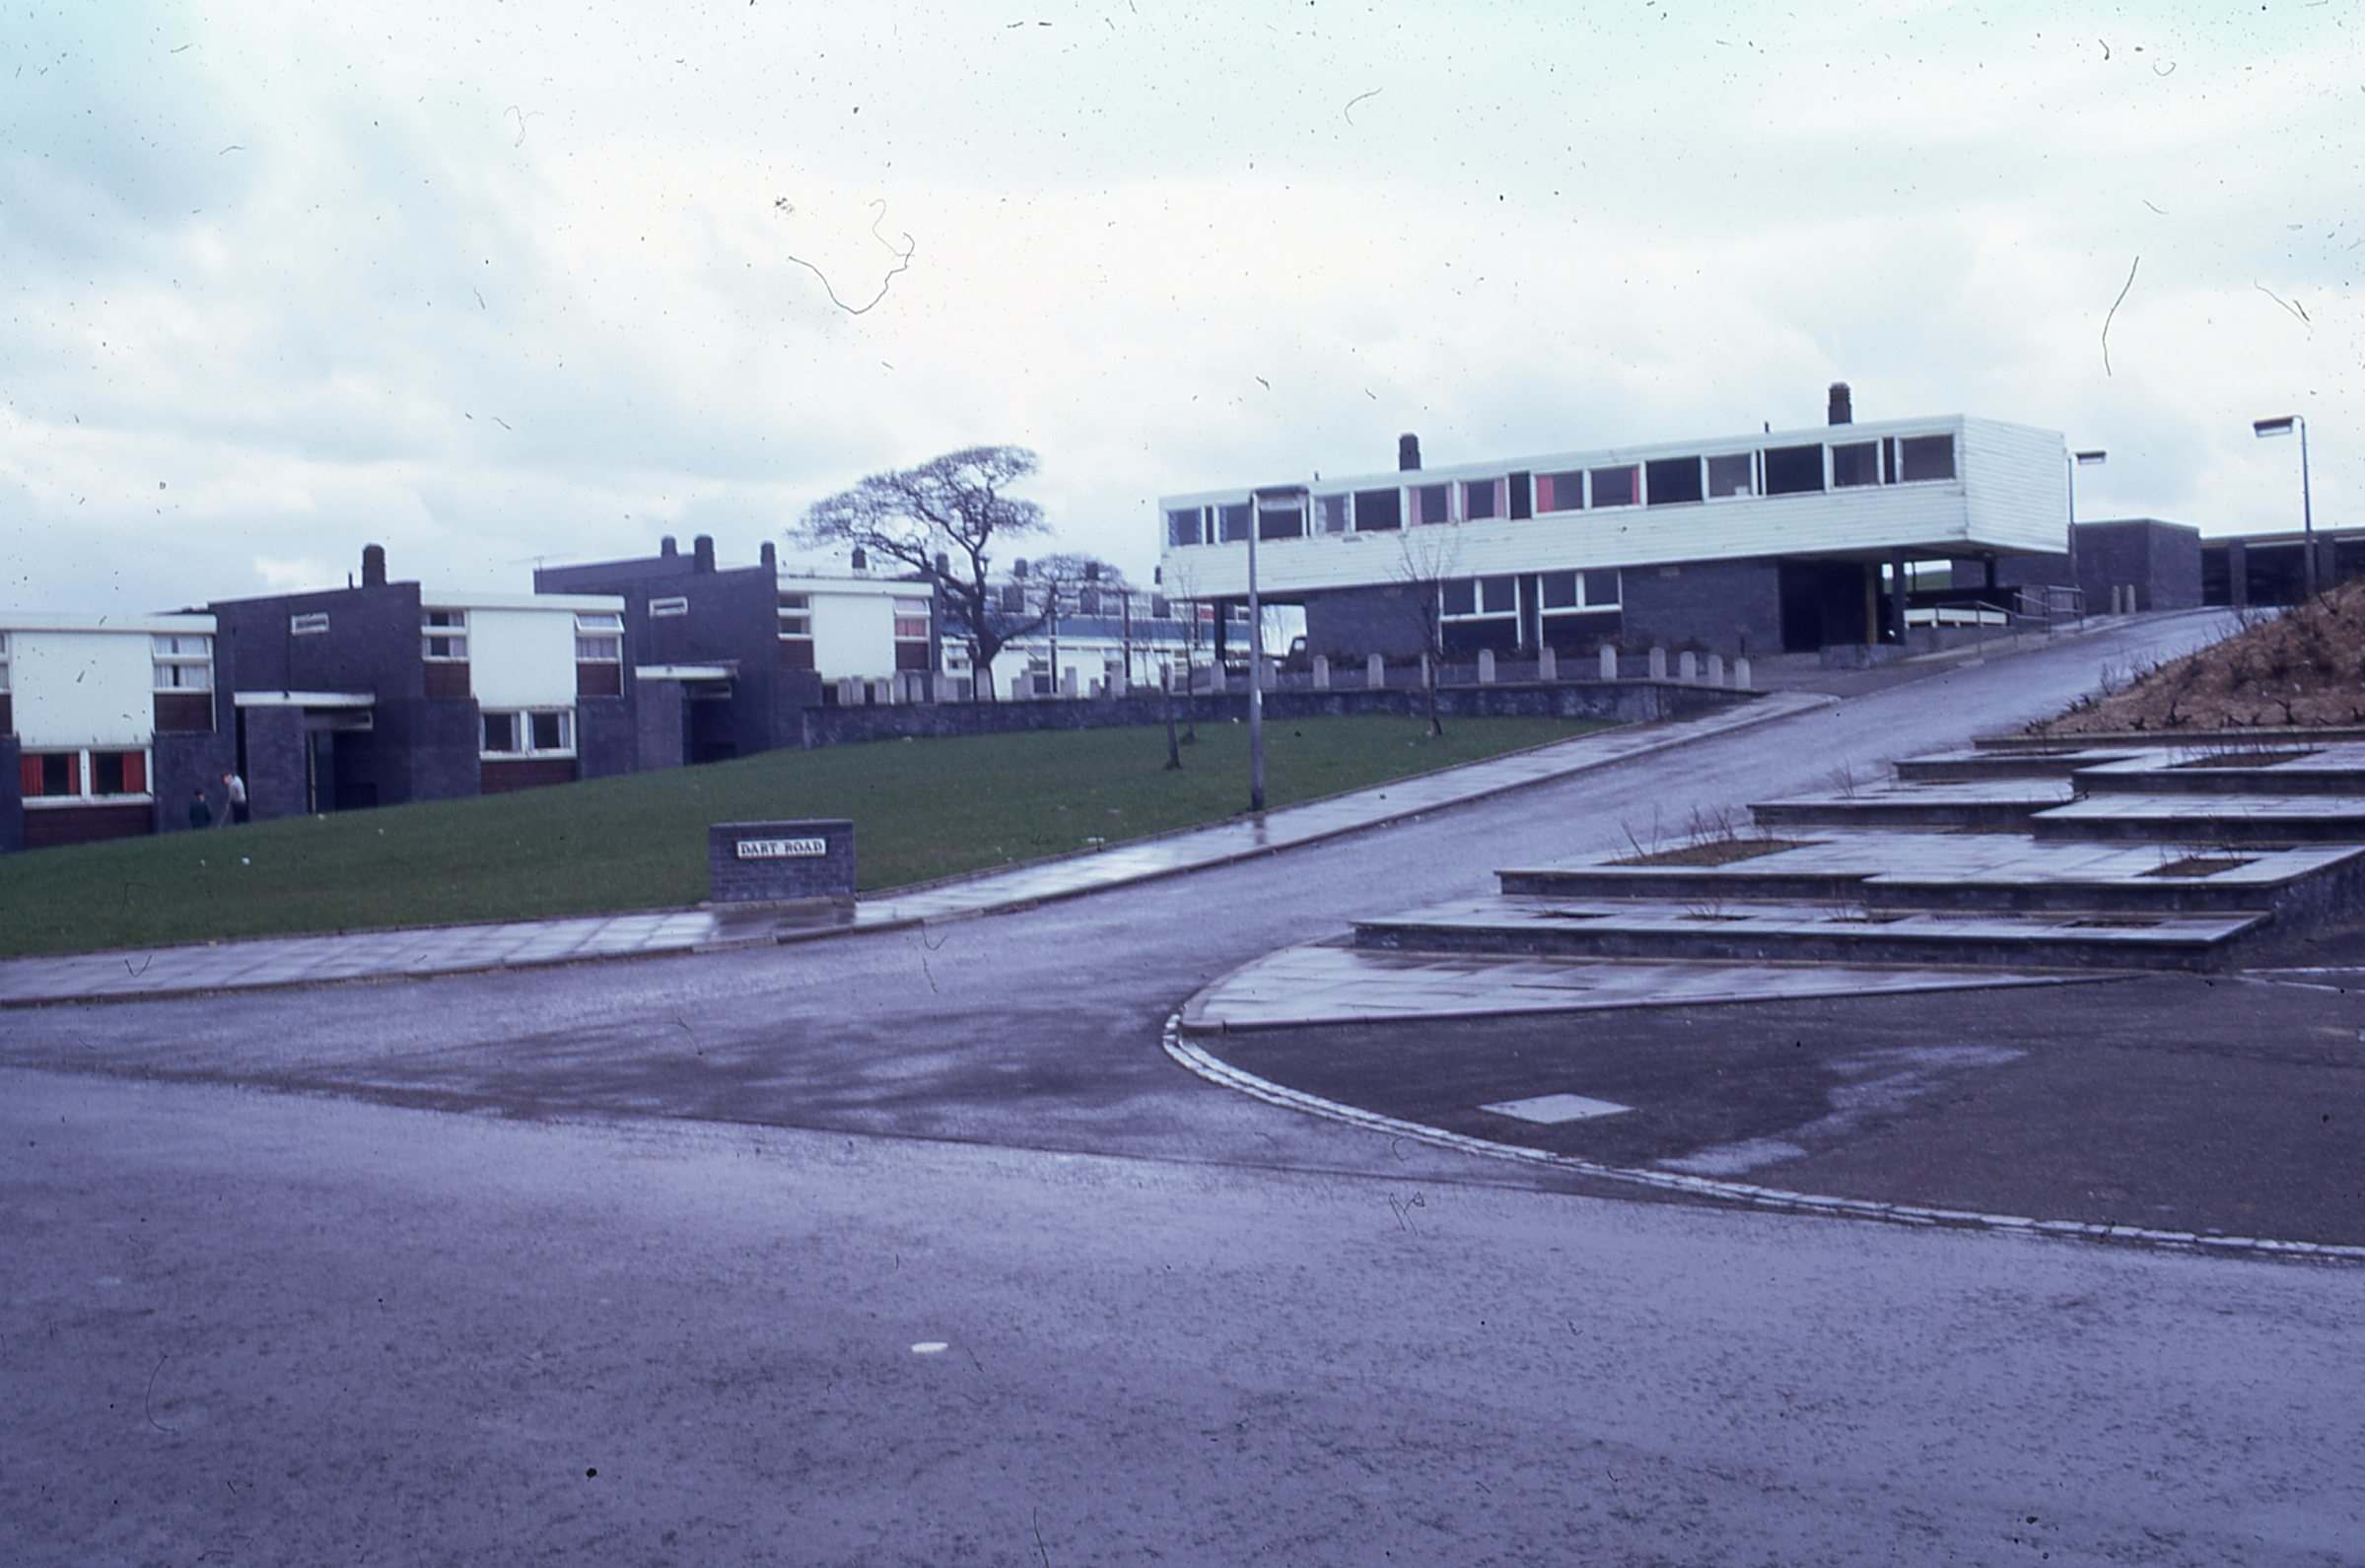 Housing designed by architect Victor Pasmore around 1970 in Peterlee New Town